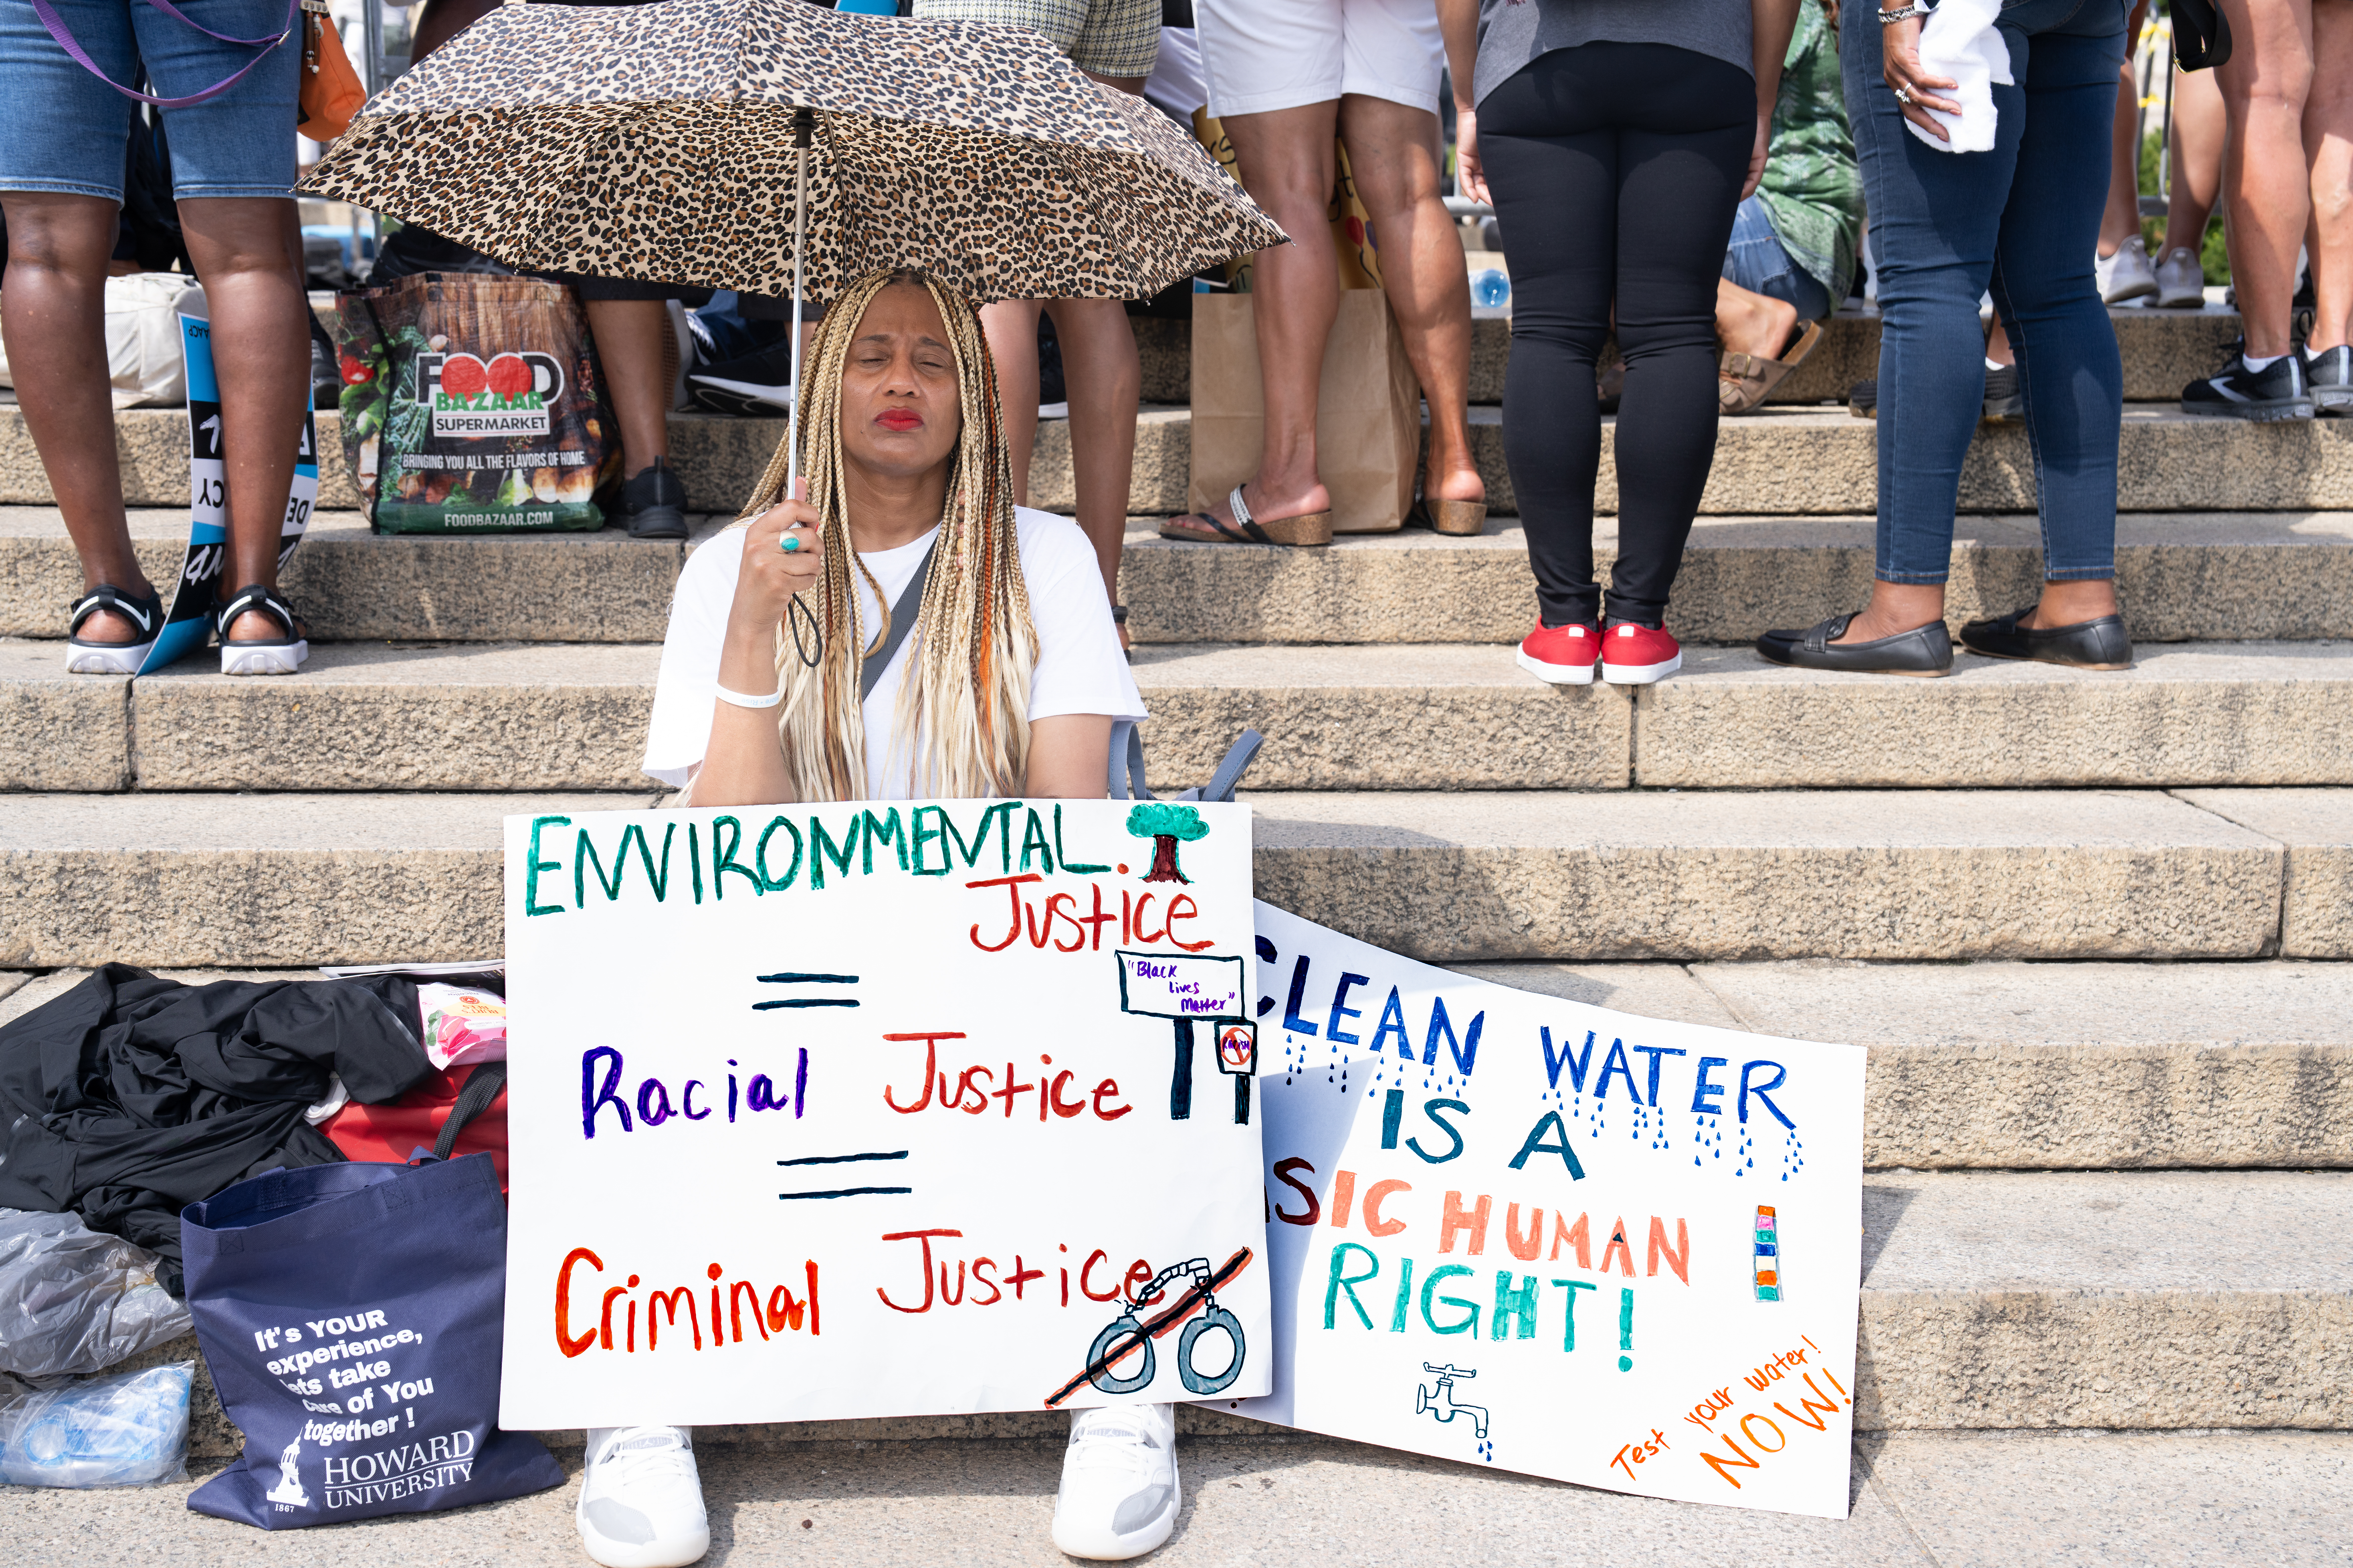 A Black person with box braids sits on the ground with signs in front of them advocating for environmental justice and clean water.